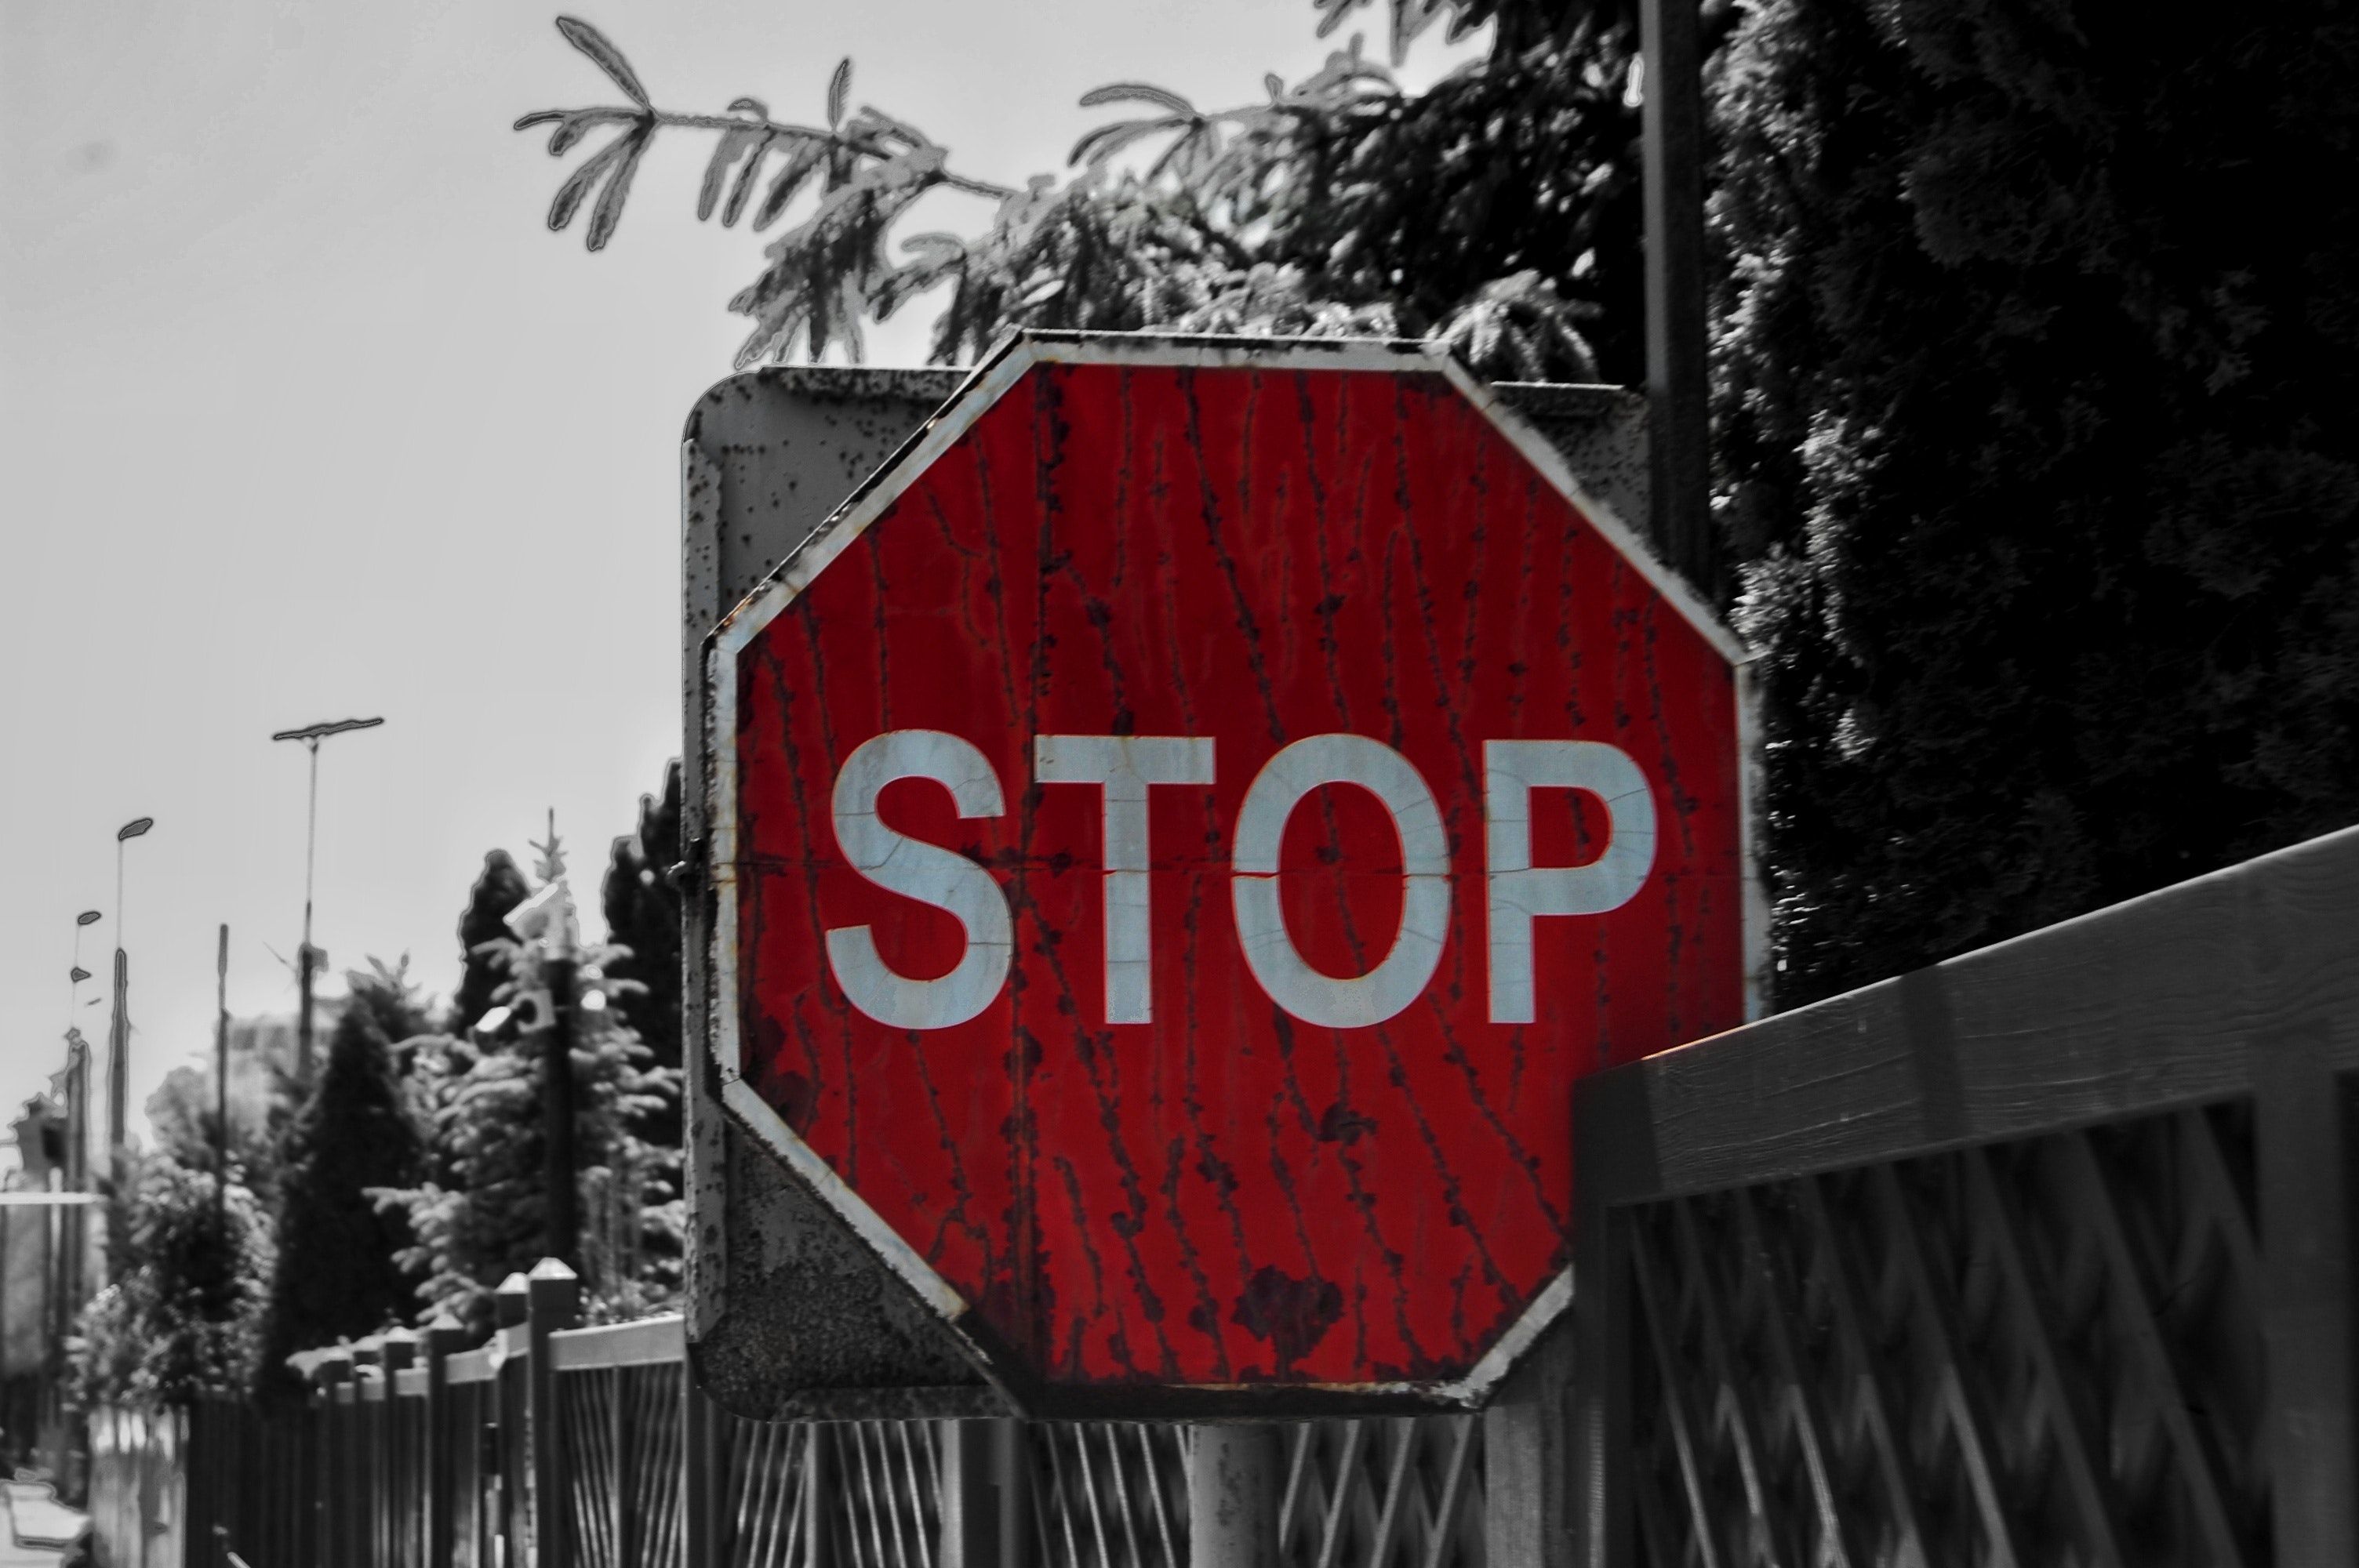 Free of road, road sign, stop